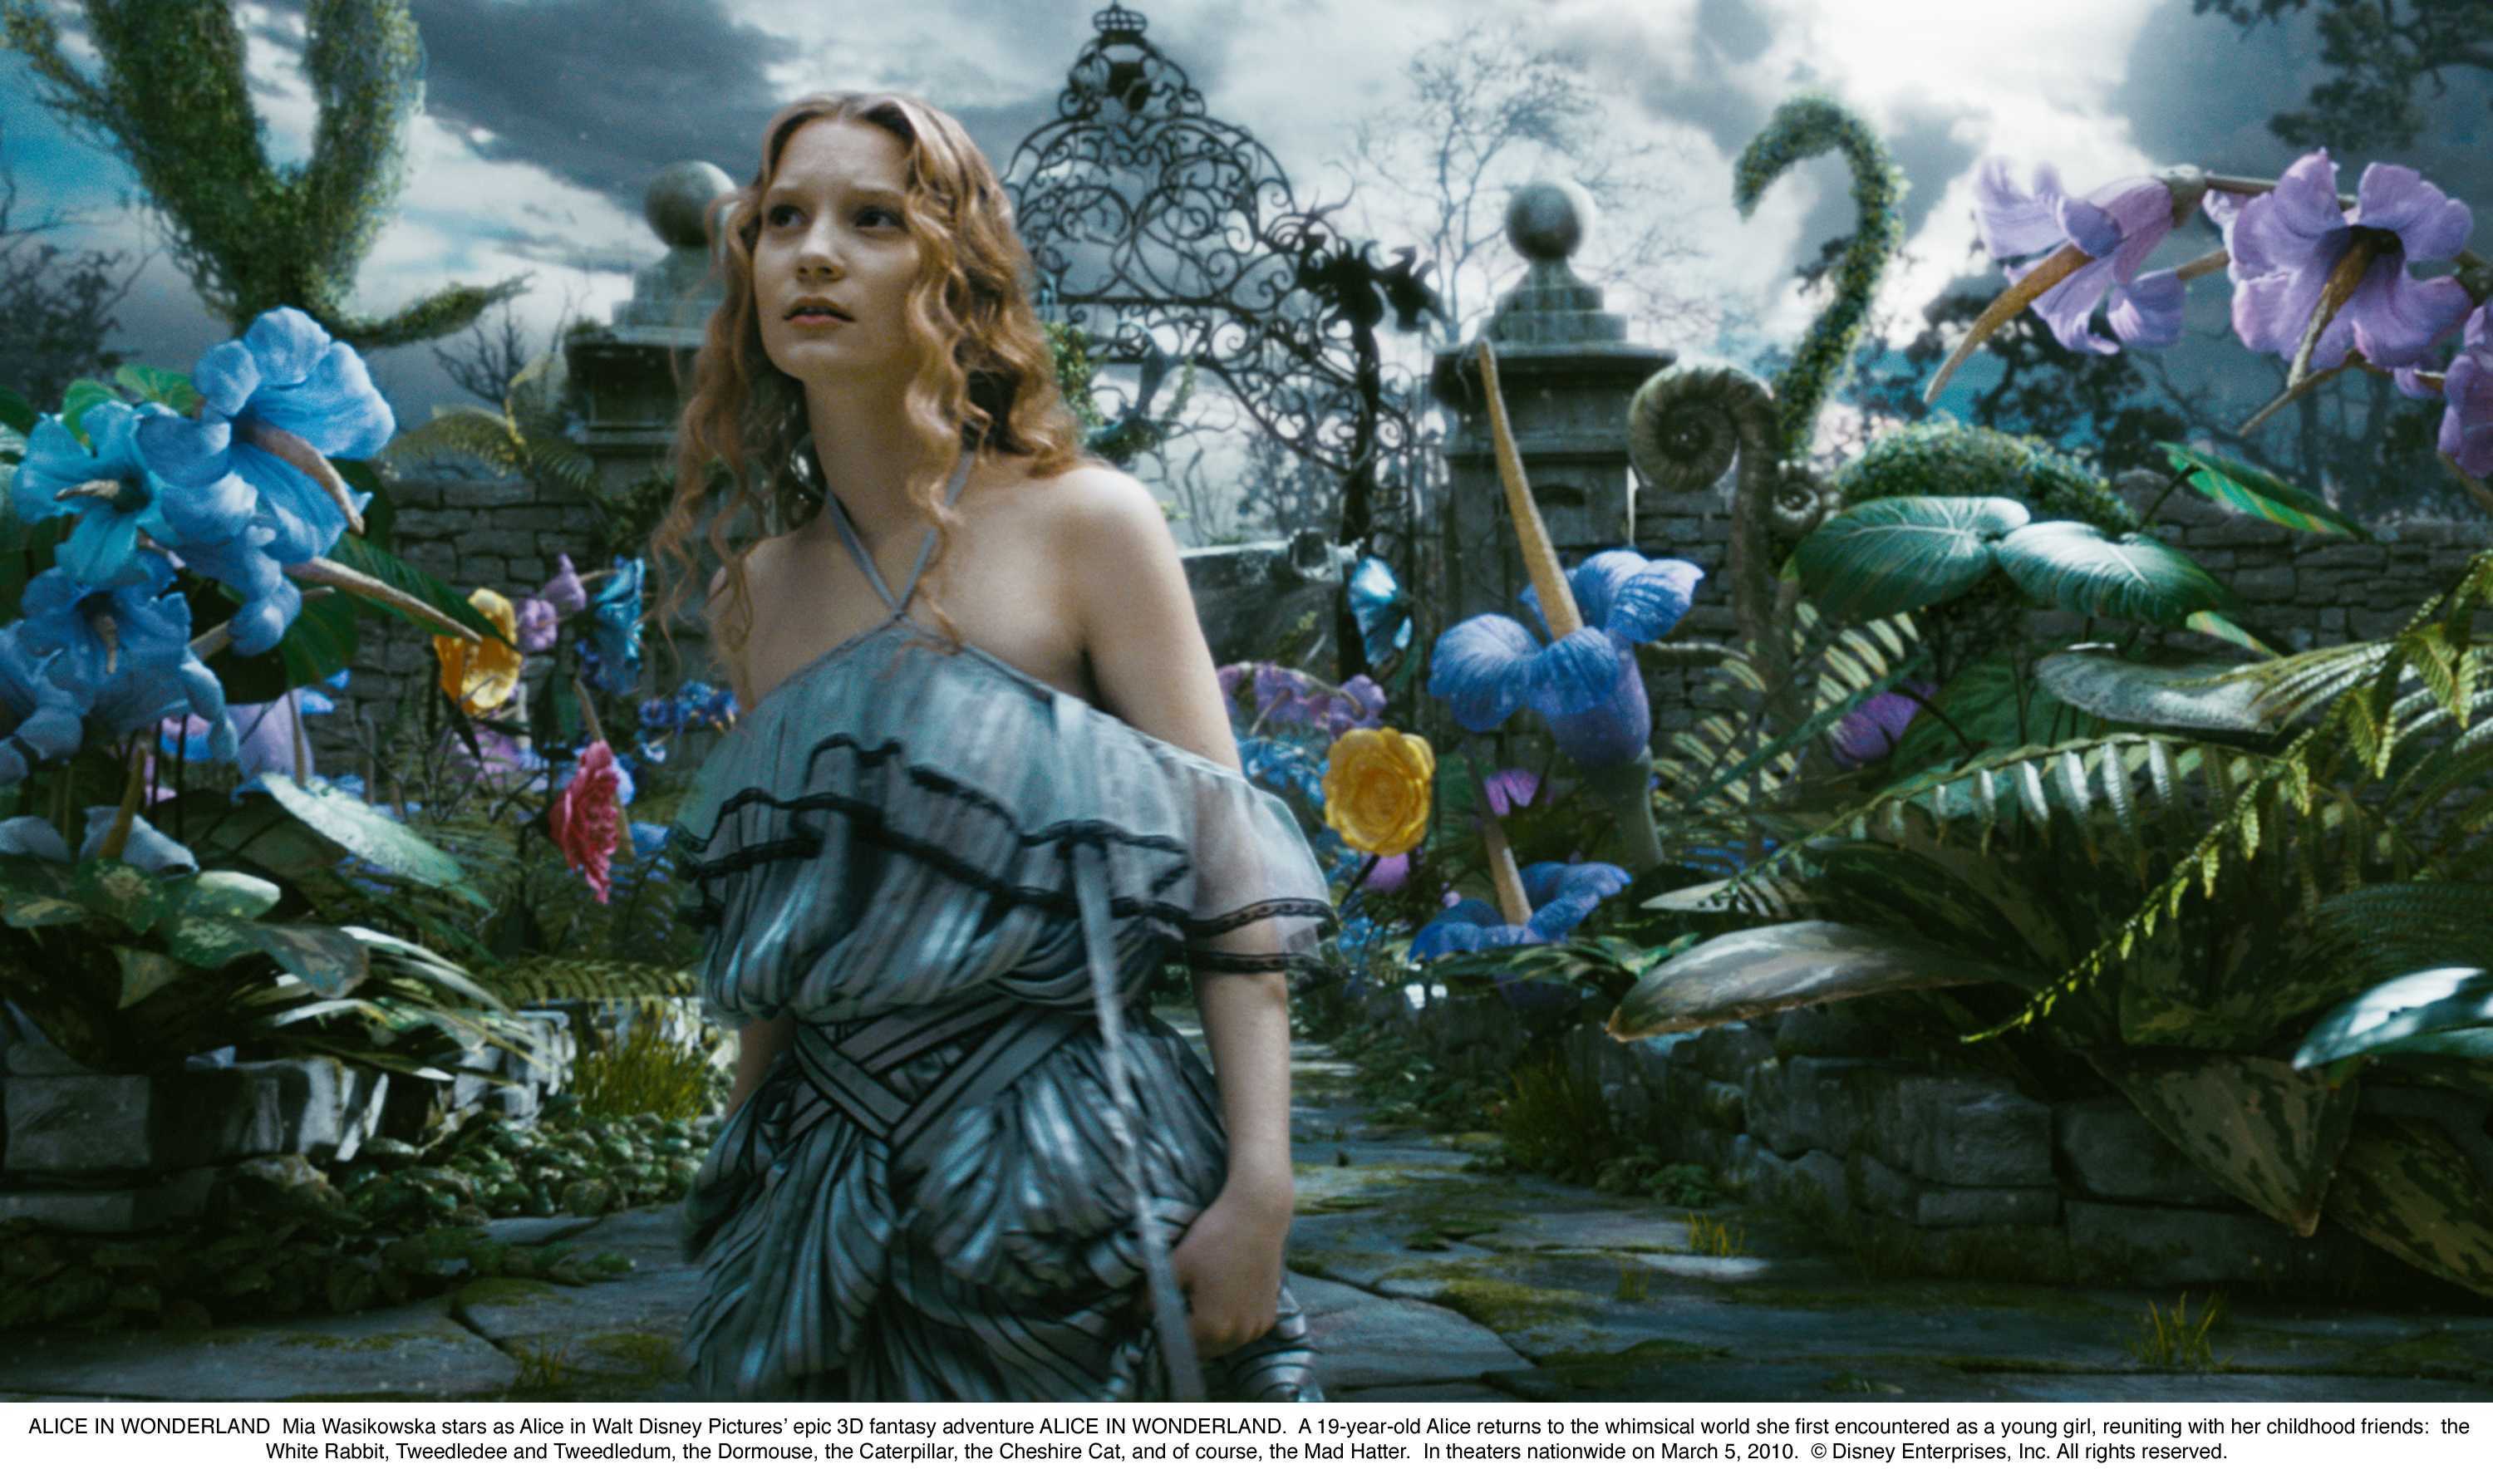 Alice in Wonderland Movie HD Wallpapers and ScreenSaver @ Leawo